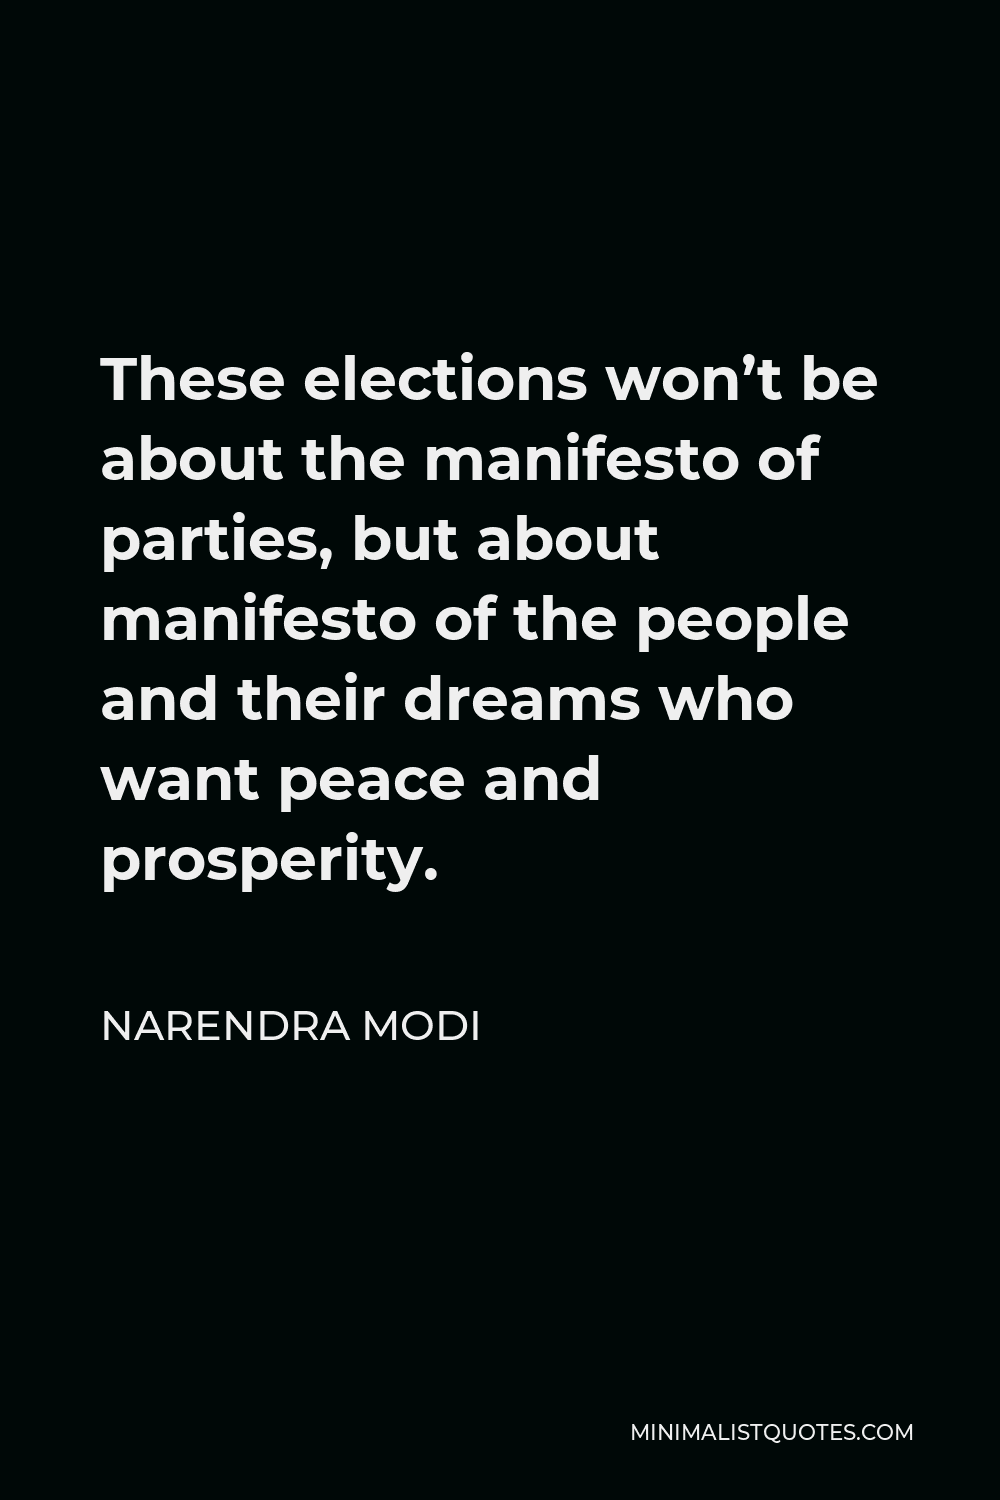 Narendra Modi Quote - These elections won’t be about the manifesto of parties, but about manifesto of the people and their dreams who want peace and prosperity.